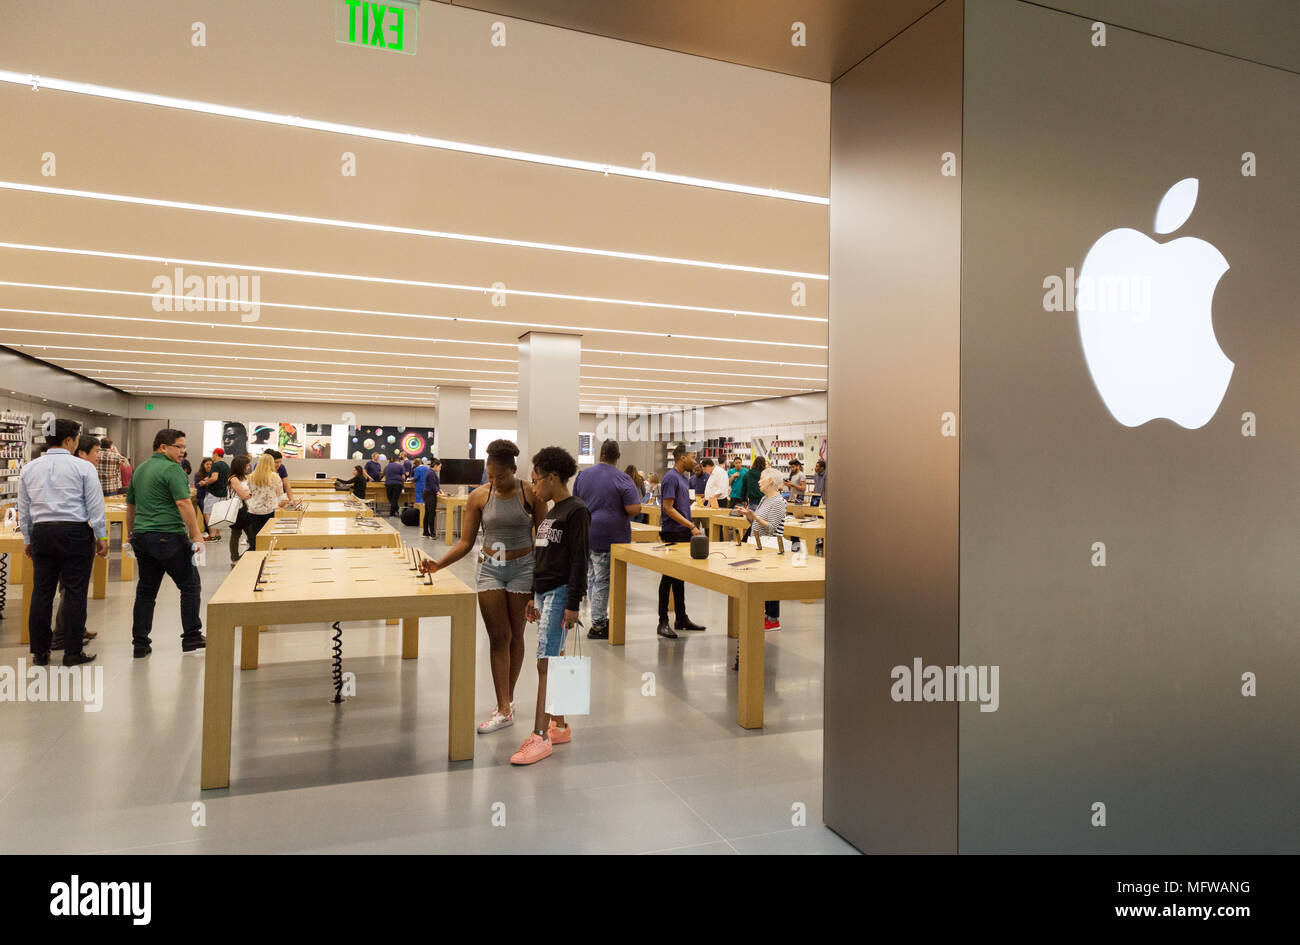 Houston-area Apple Stores to reopen in time for iPhone 12 sales